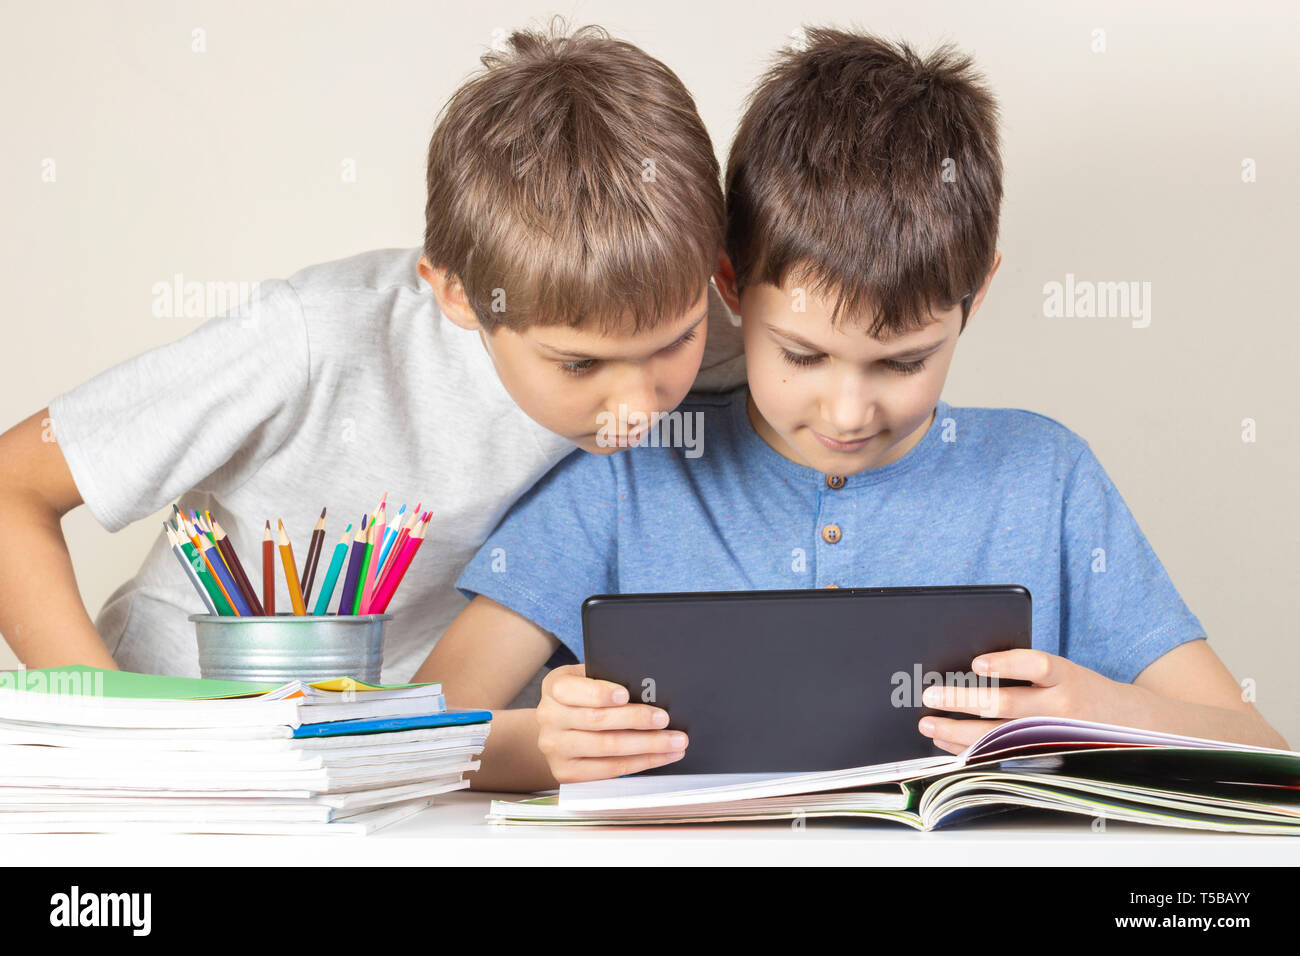 Kids using together tablet computer at home Stock Photo